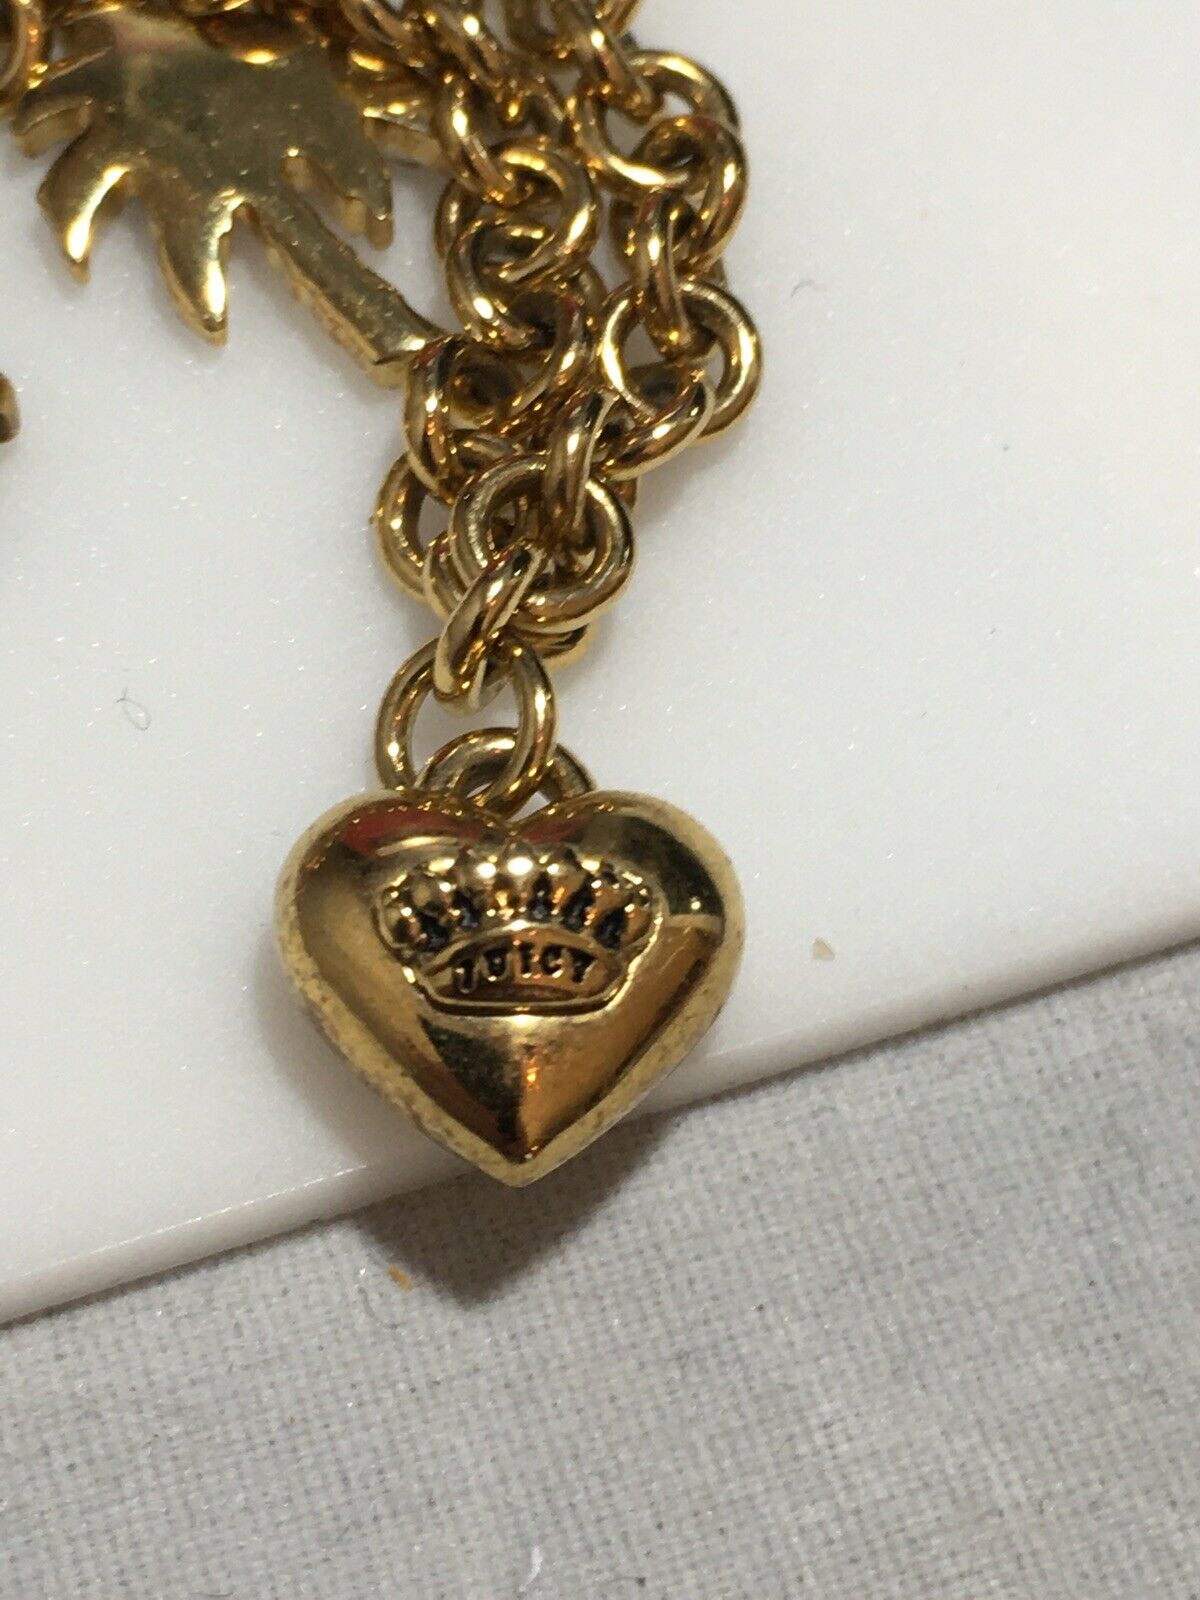 Juicy Couture Charm Bracelet Gold - $48 New With Tags - From KHEMTRELZ